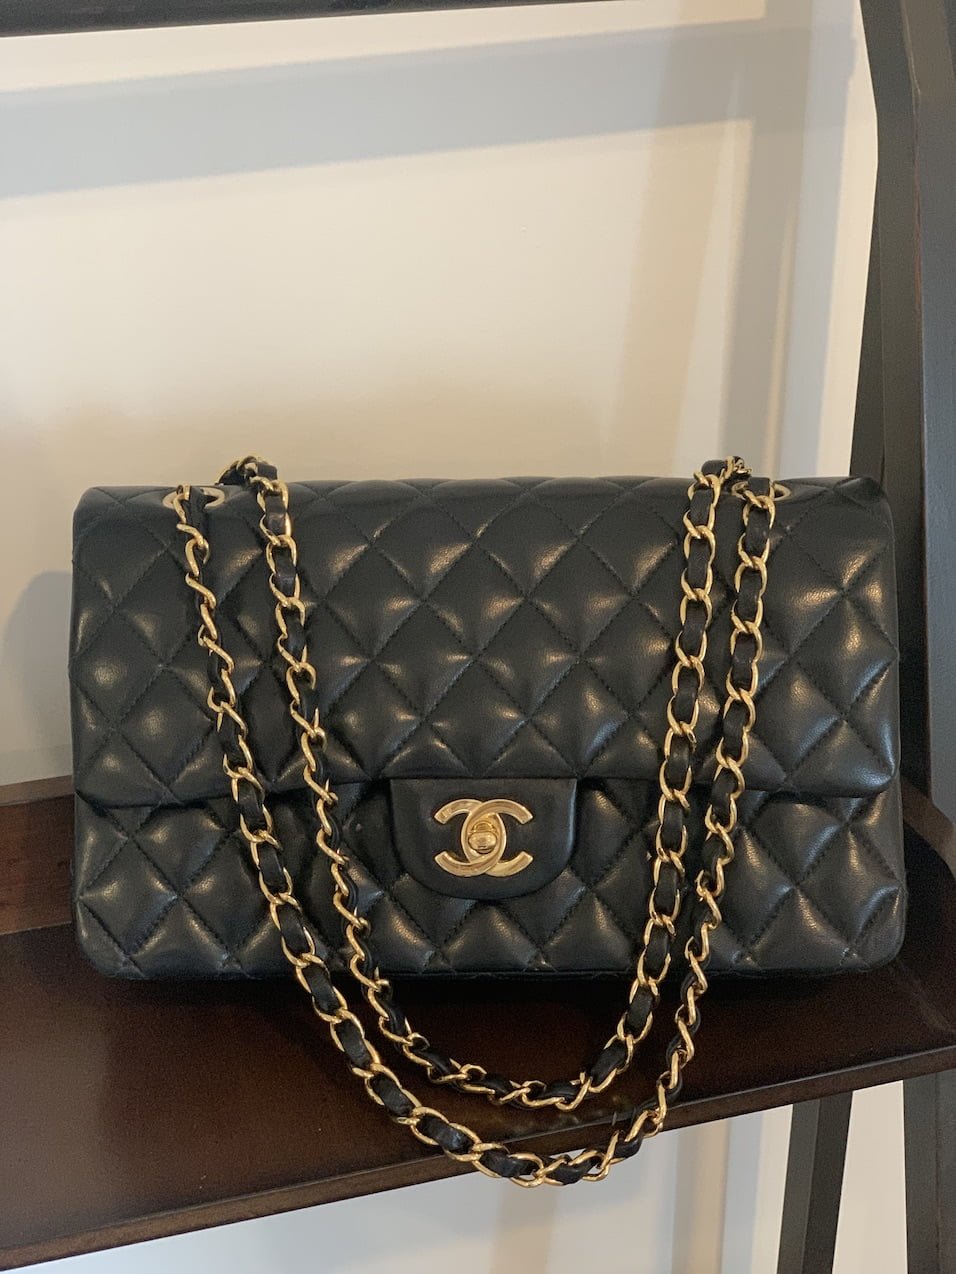 Apple Stock or Chanel Flap Guess the Better Investment - PurseBop